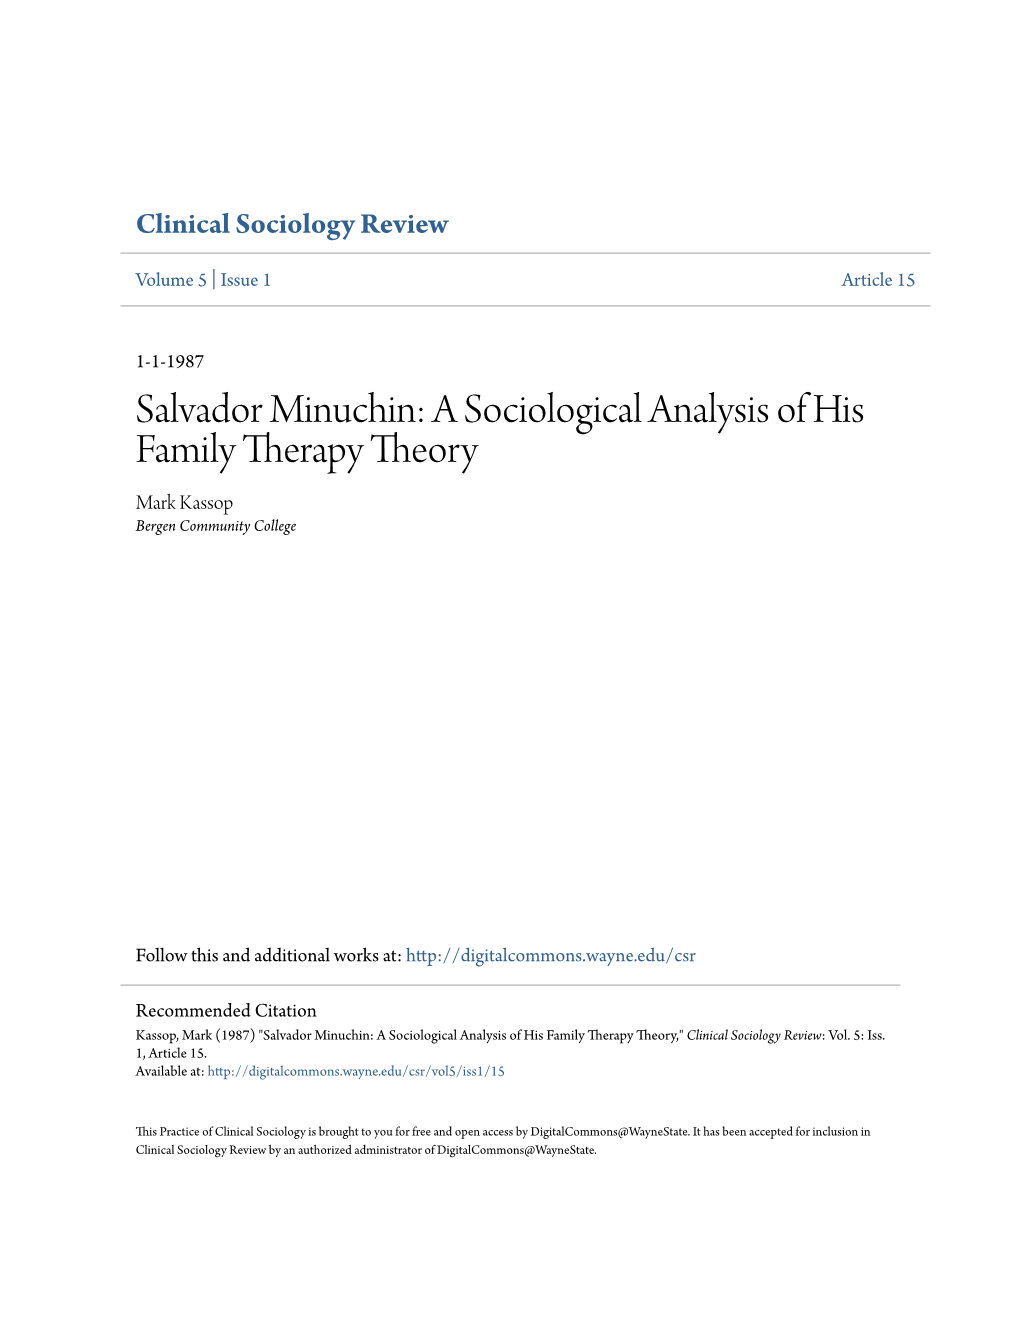 A Sociological Analysis of His Family Therapy Theory Mark Kassop Bergen Community College